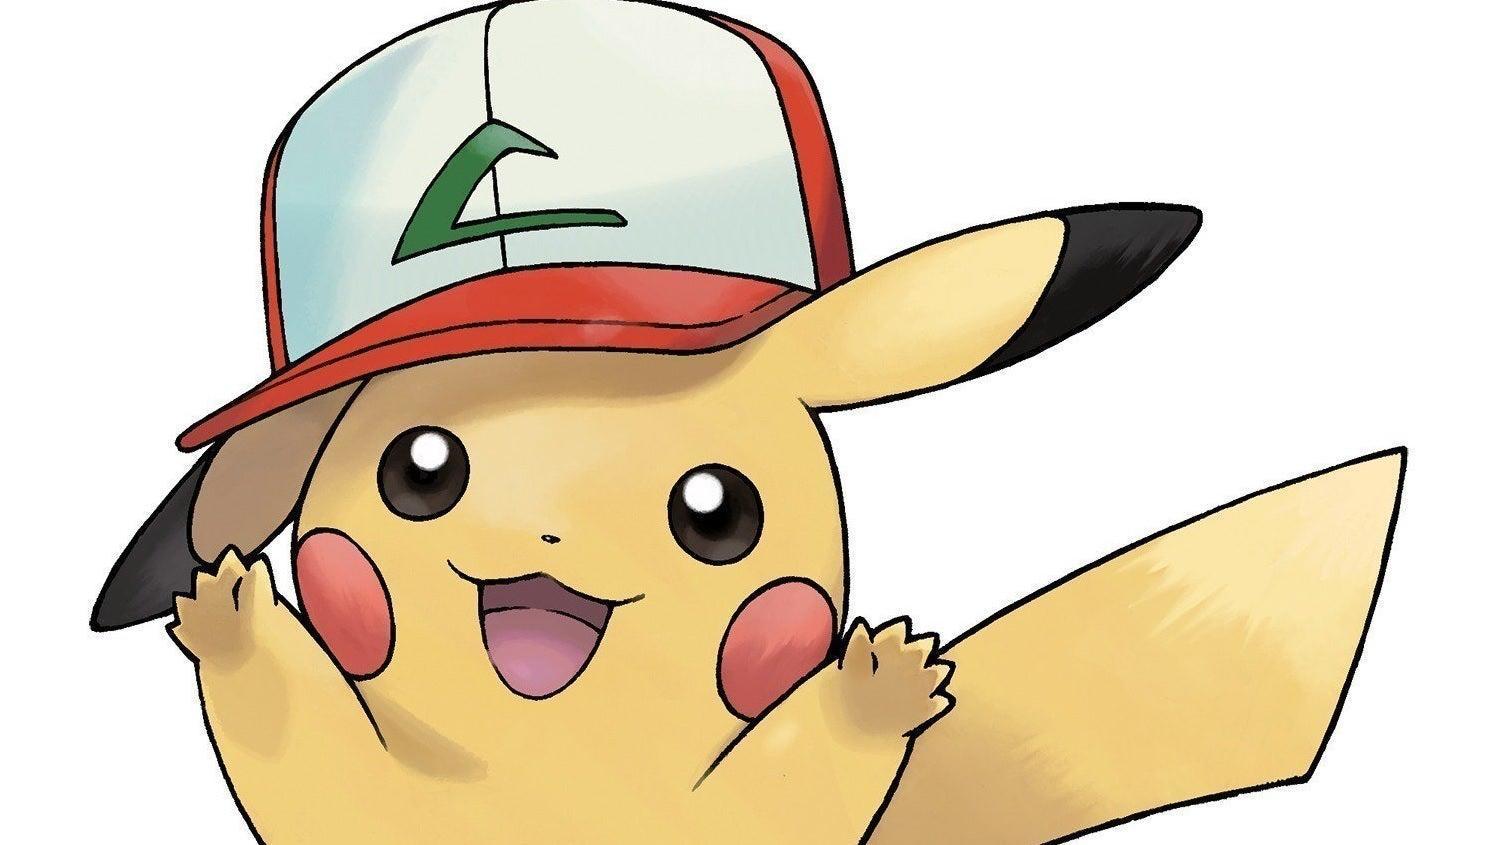 Pokemon anime replaces Pikachu with another Pikachu in a hat